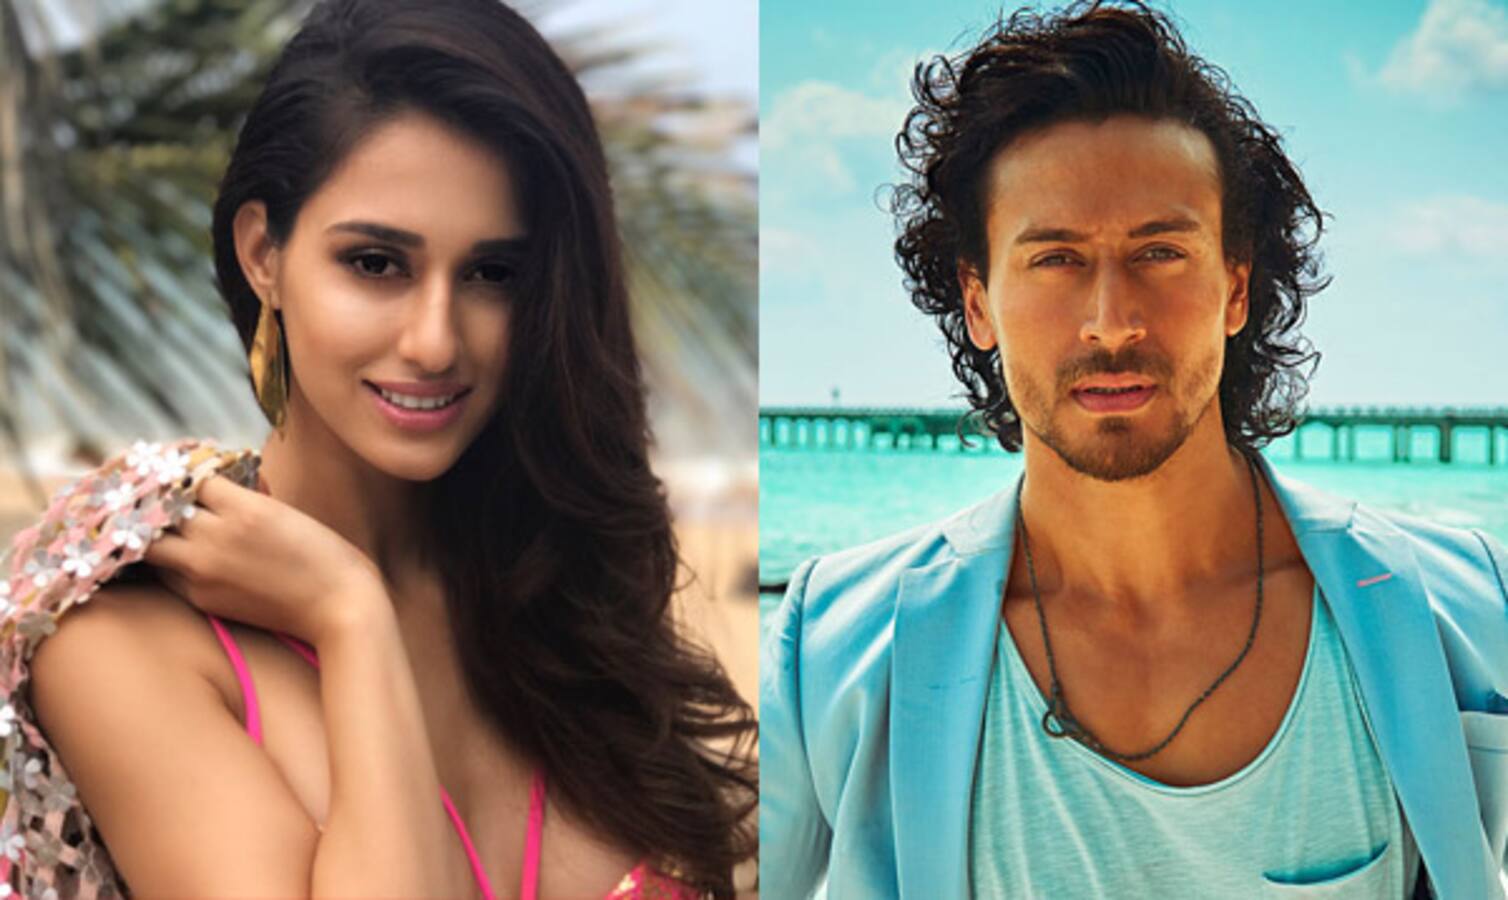 Tiger Shroff says he is excited to work with Disha Patani in Baaghi 2 - Watch video